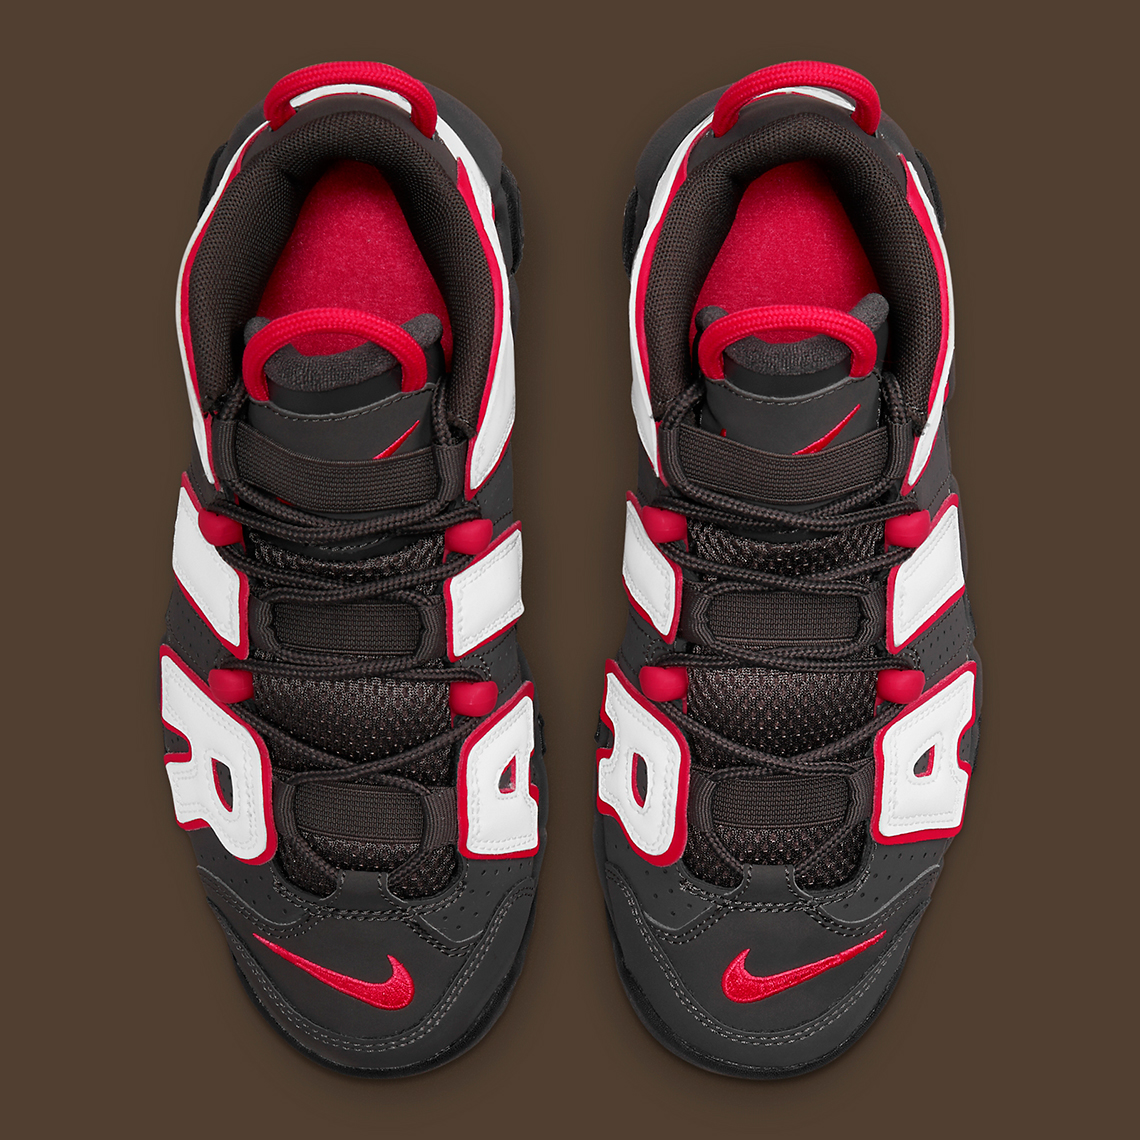 Nike Air More Uptempo Black/Red GS DH9719-200 6Y